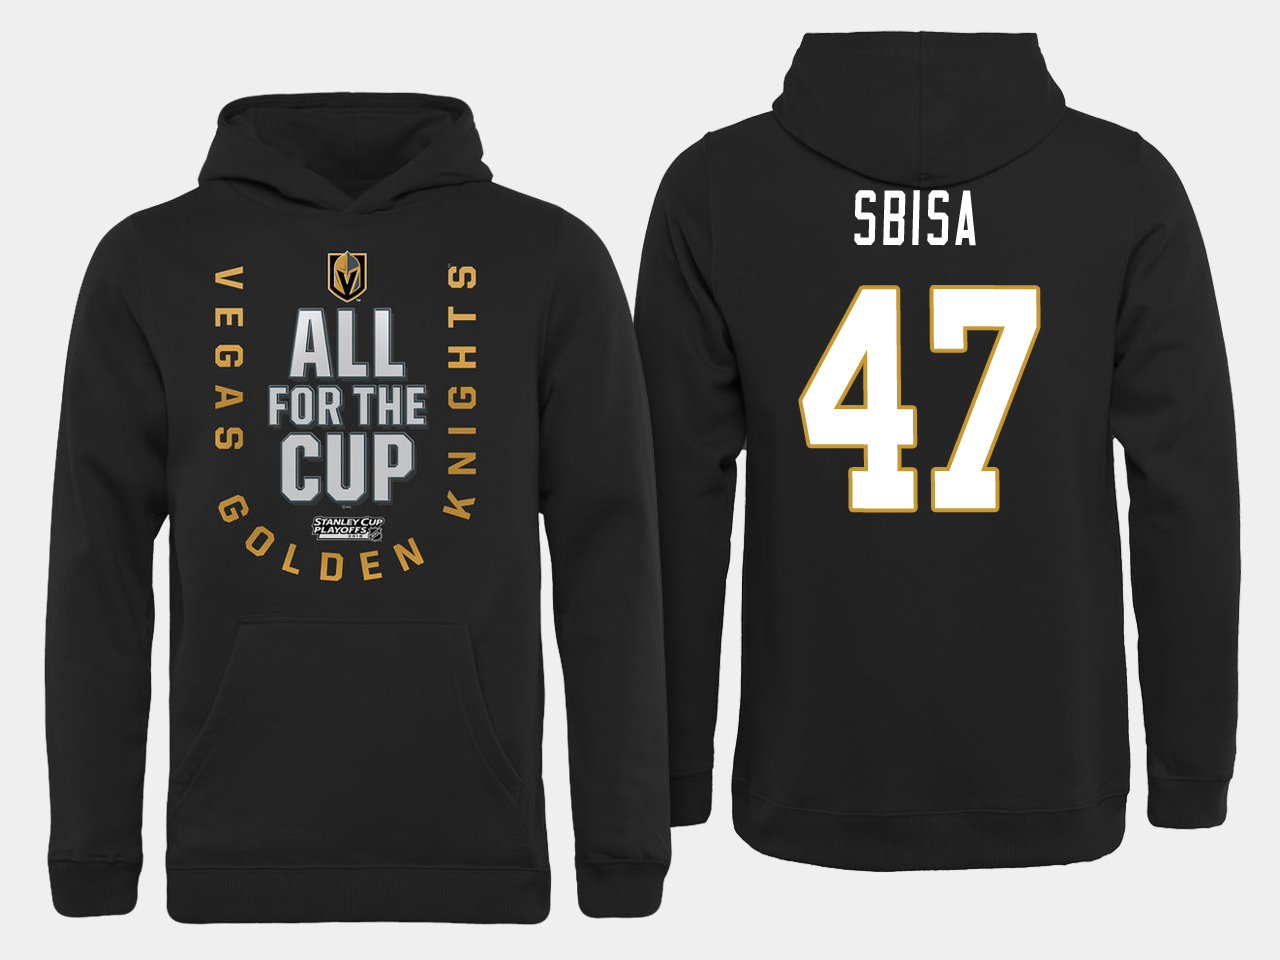 Men NHL Vegas Golden Knights 47 Sbisa All for the Cup hoodie